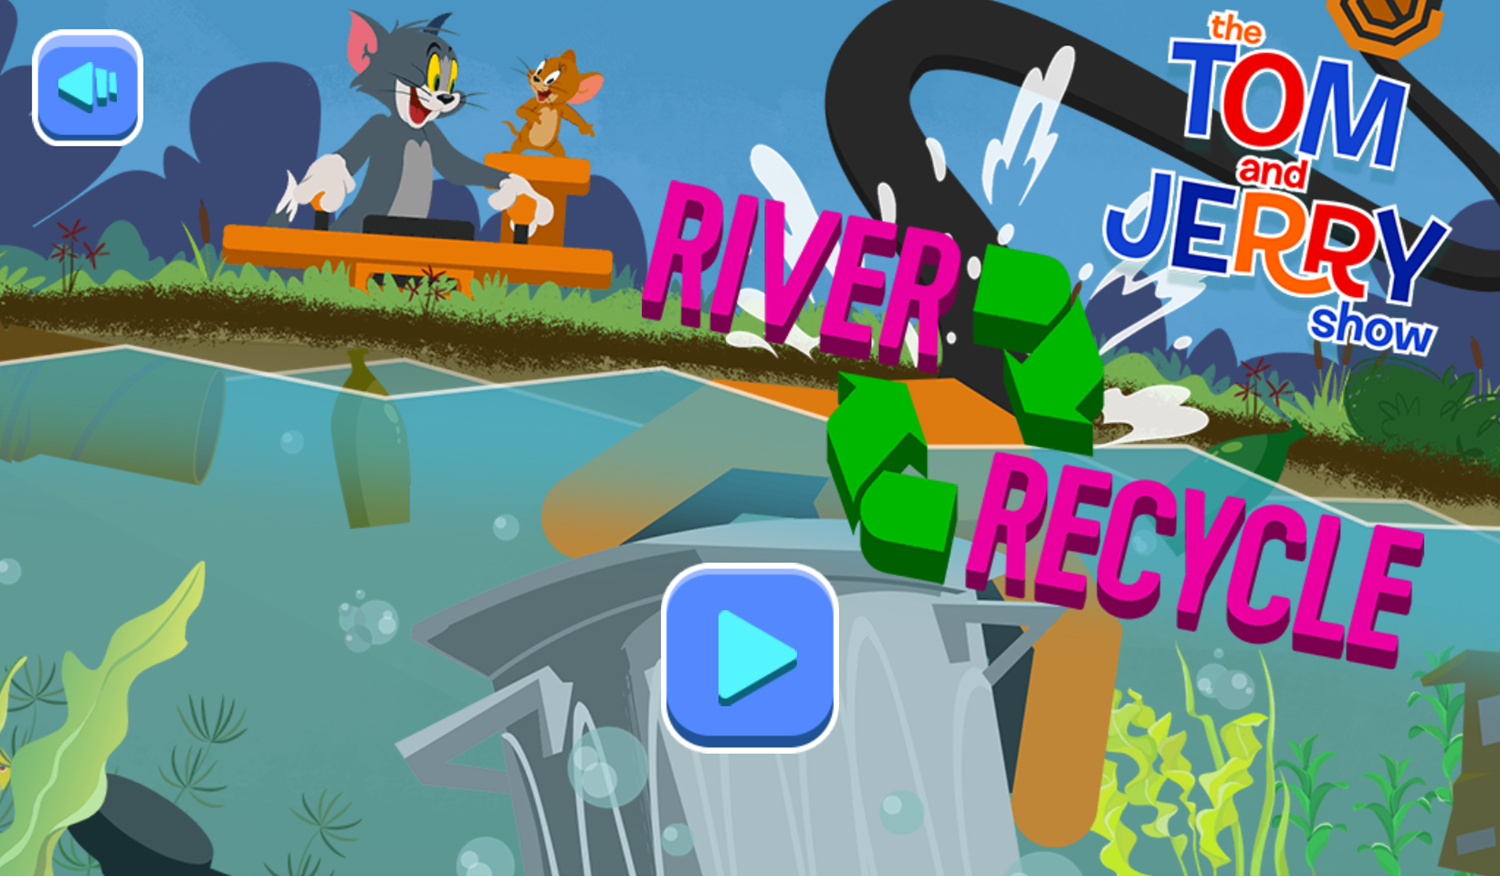 Tom and Jerry River Recycle Game Welcome Screen Screenshot.